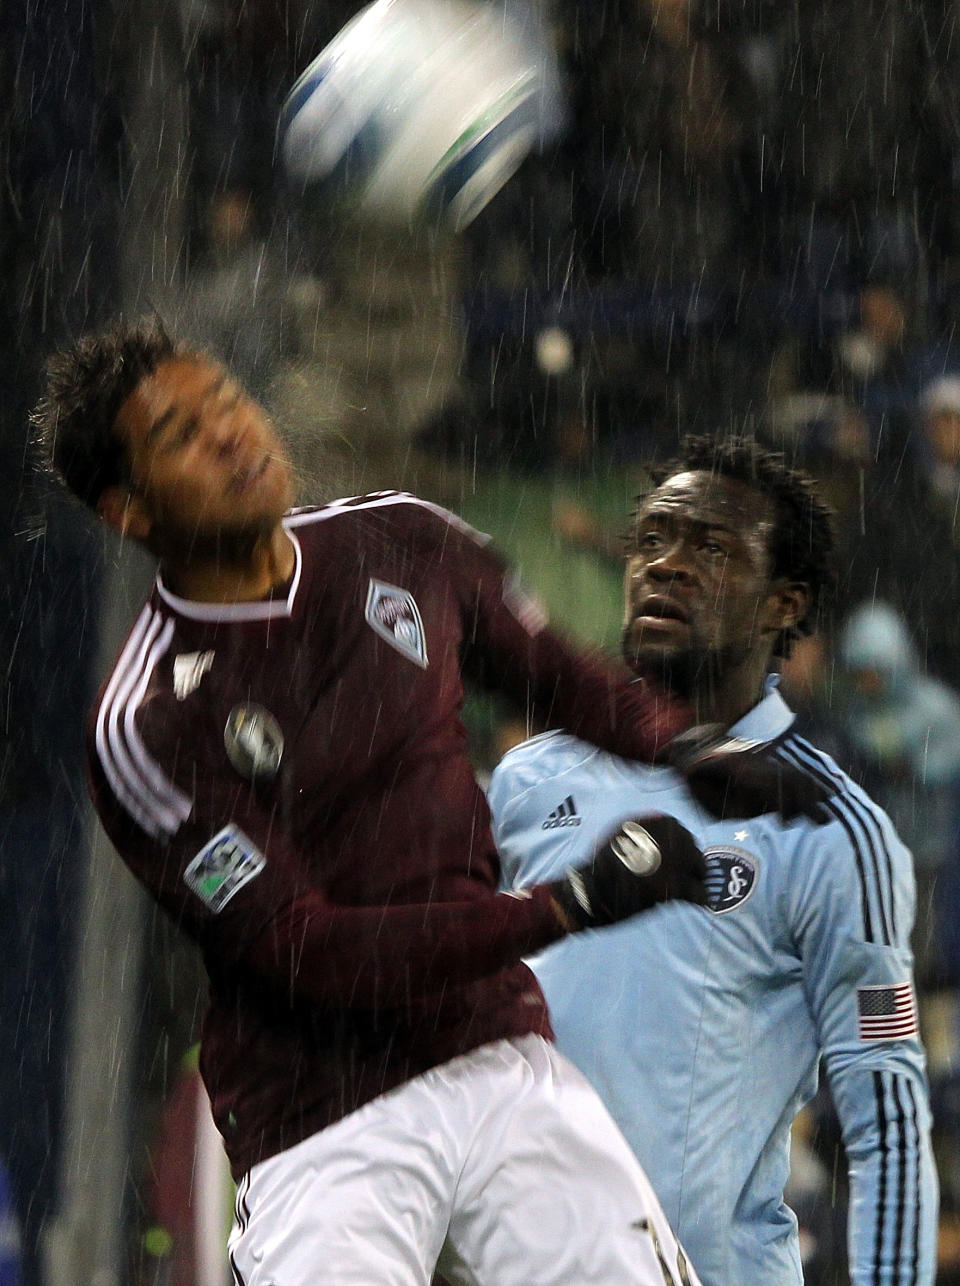 KANSAS CITY, KS - NOVEMBER 02: Kei Kamara #23 of Sporting Kansas City watches as Quincy Amarikwa #12 the Colorado Rapids heads the ball during the game on November 2, 2011 at LiveStrong Sporting Park in Kansas City, Kansas. (Photo by Jamie Squire/Getty Images)